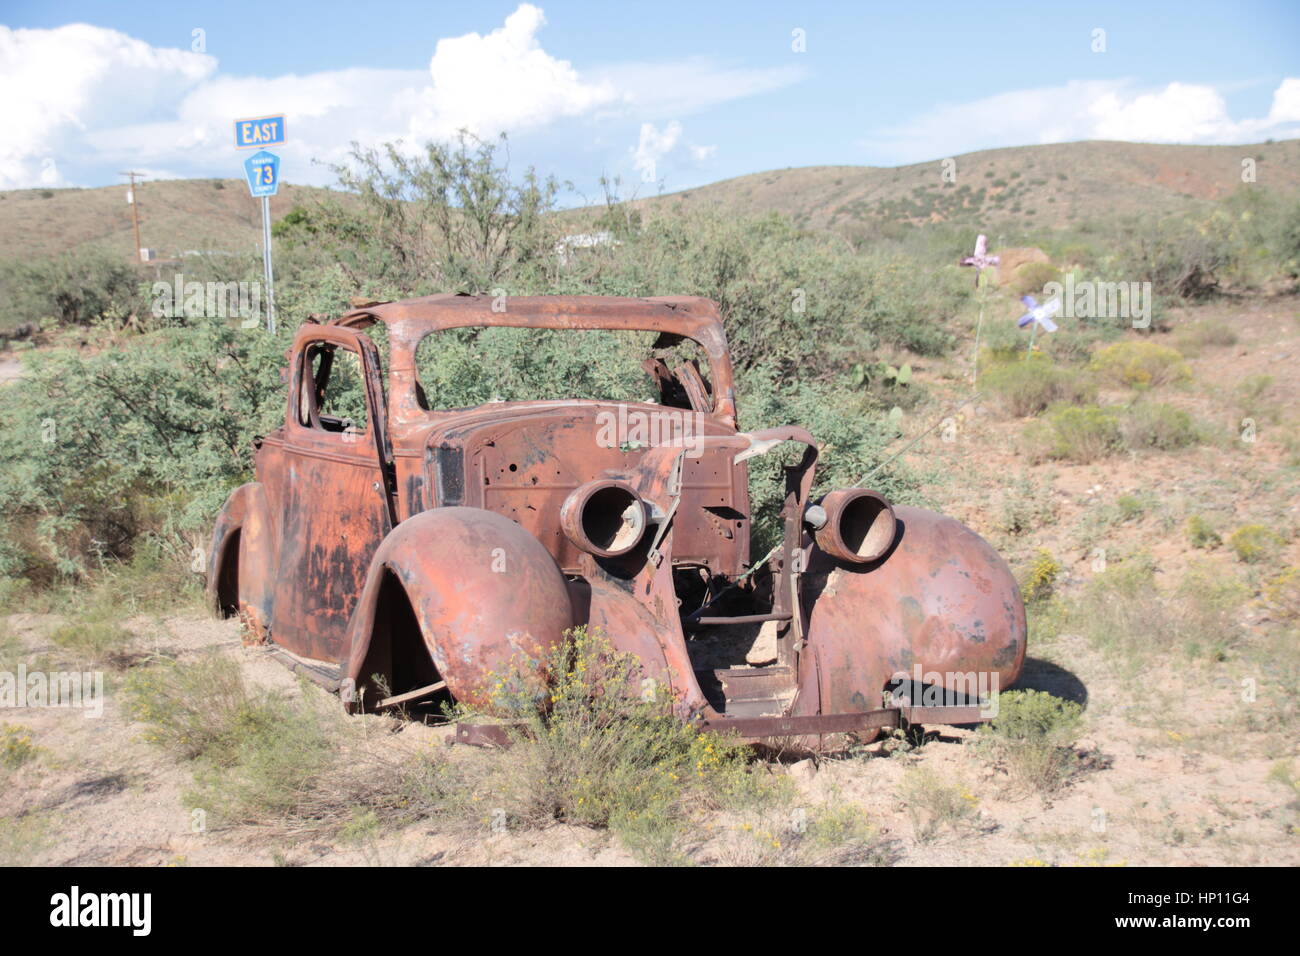 This is a rusted out antique vintage 2 door car Stock Photo